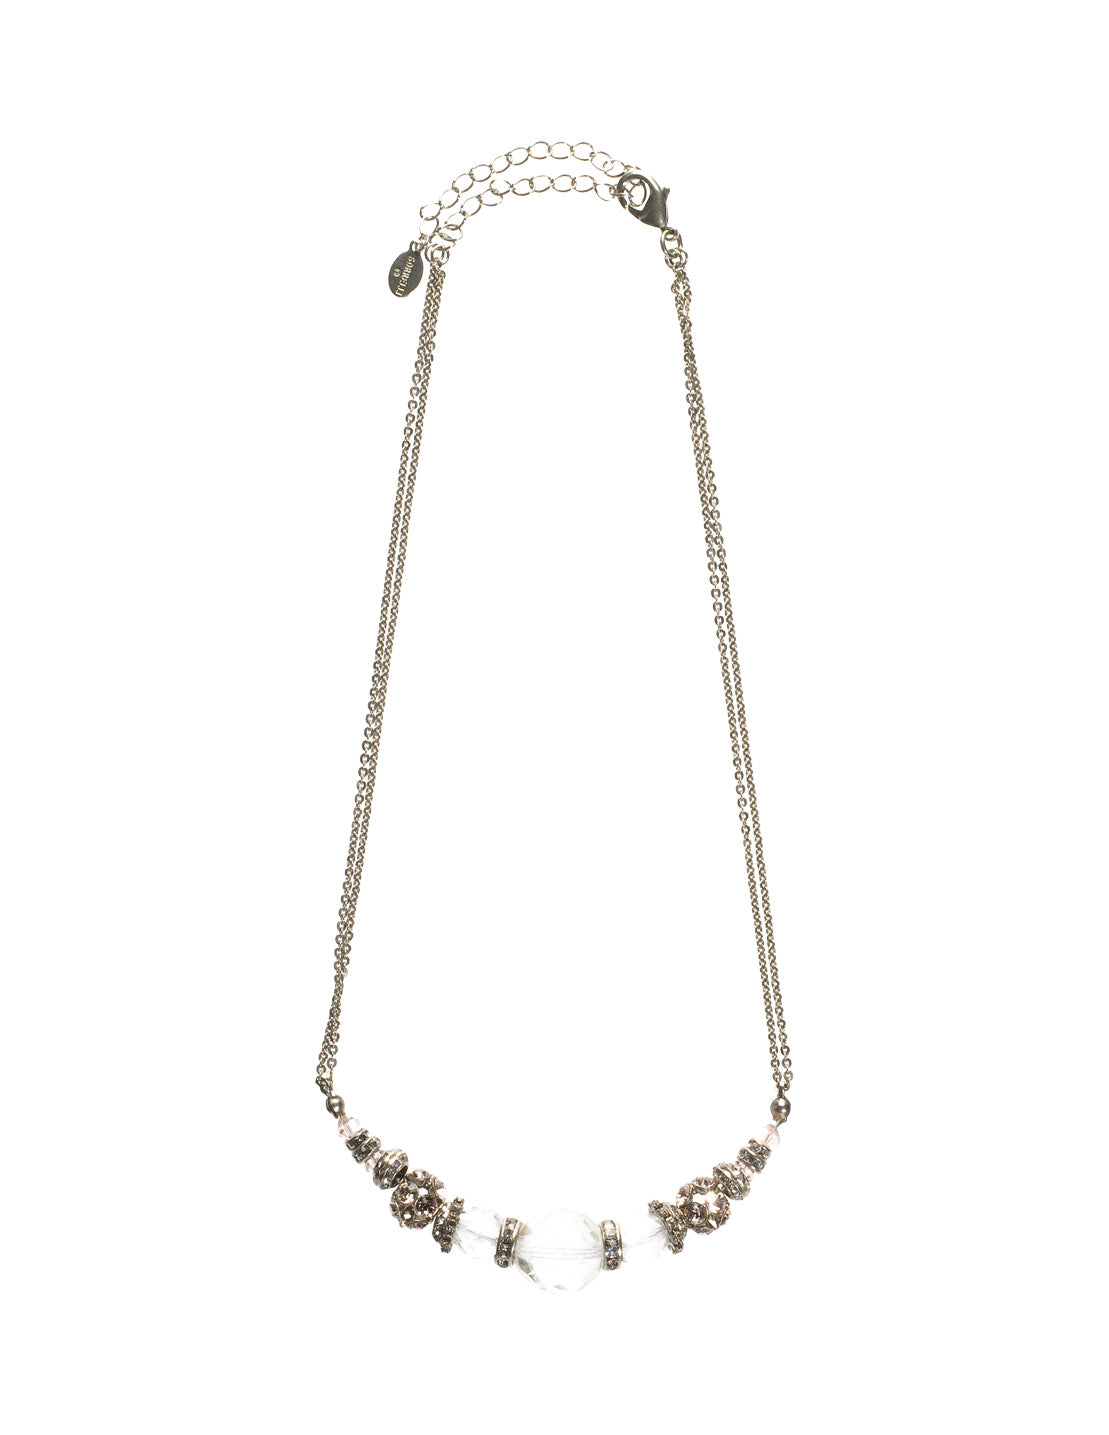 Crystal Beaded Chain Tennis Necklace - NCE5ASSNB